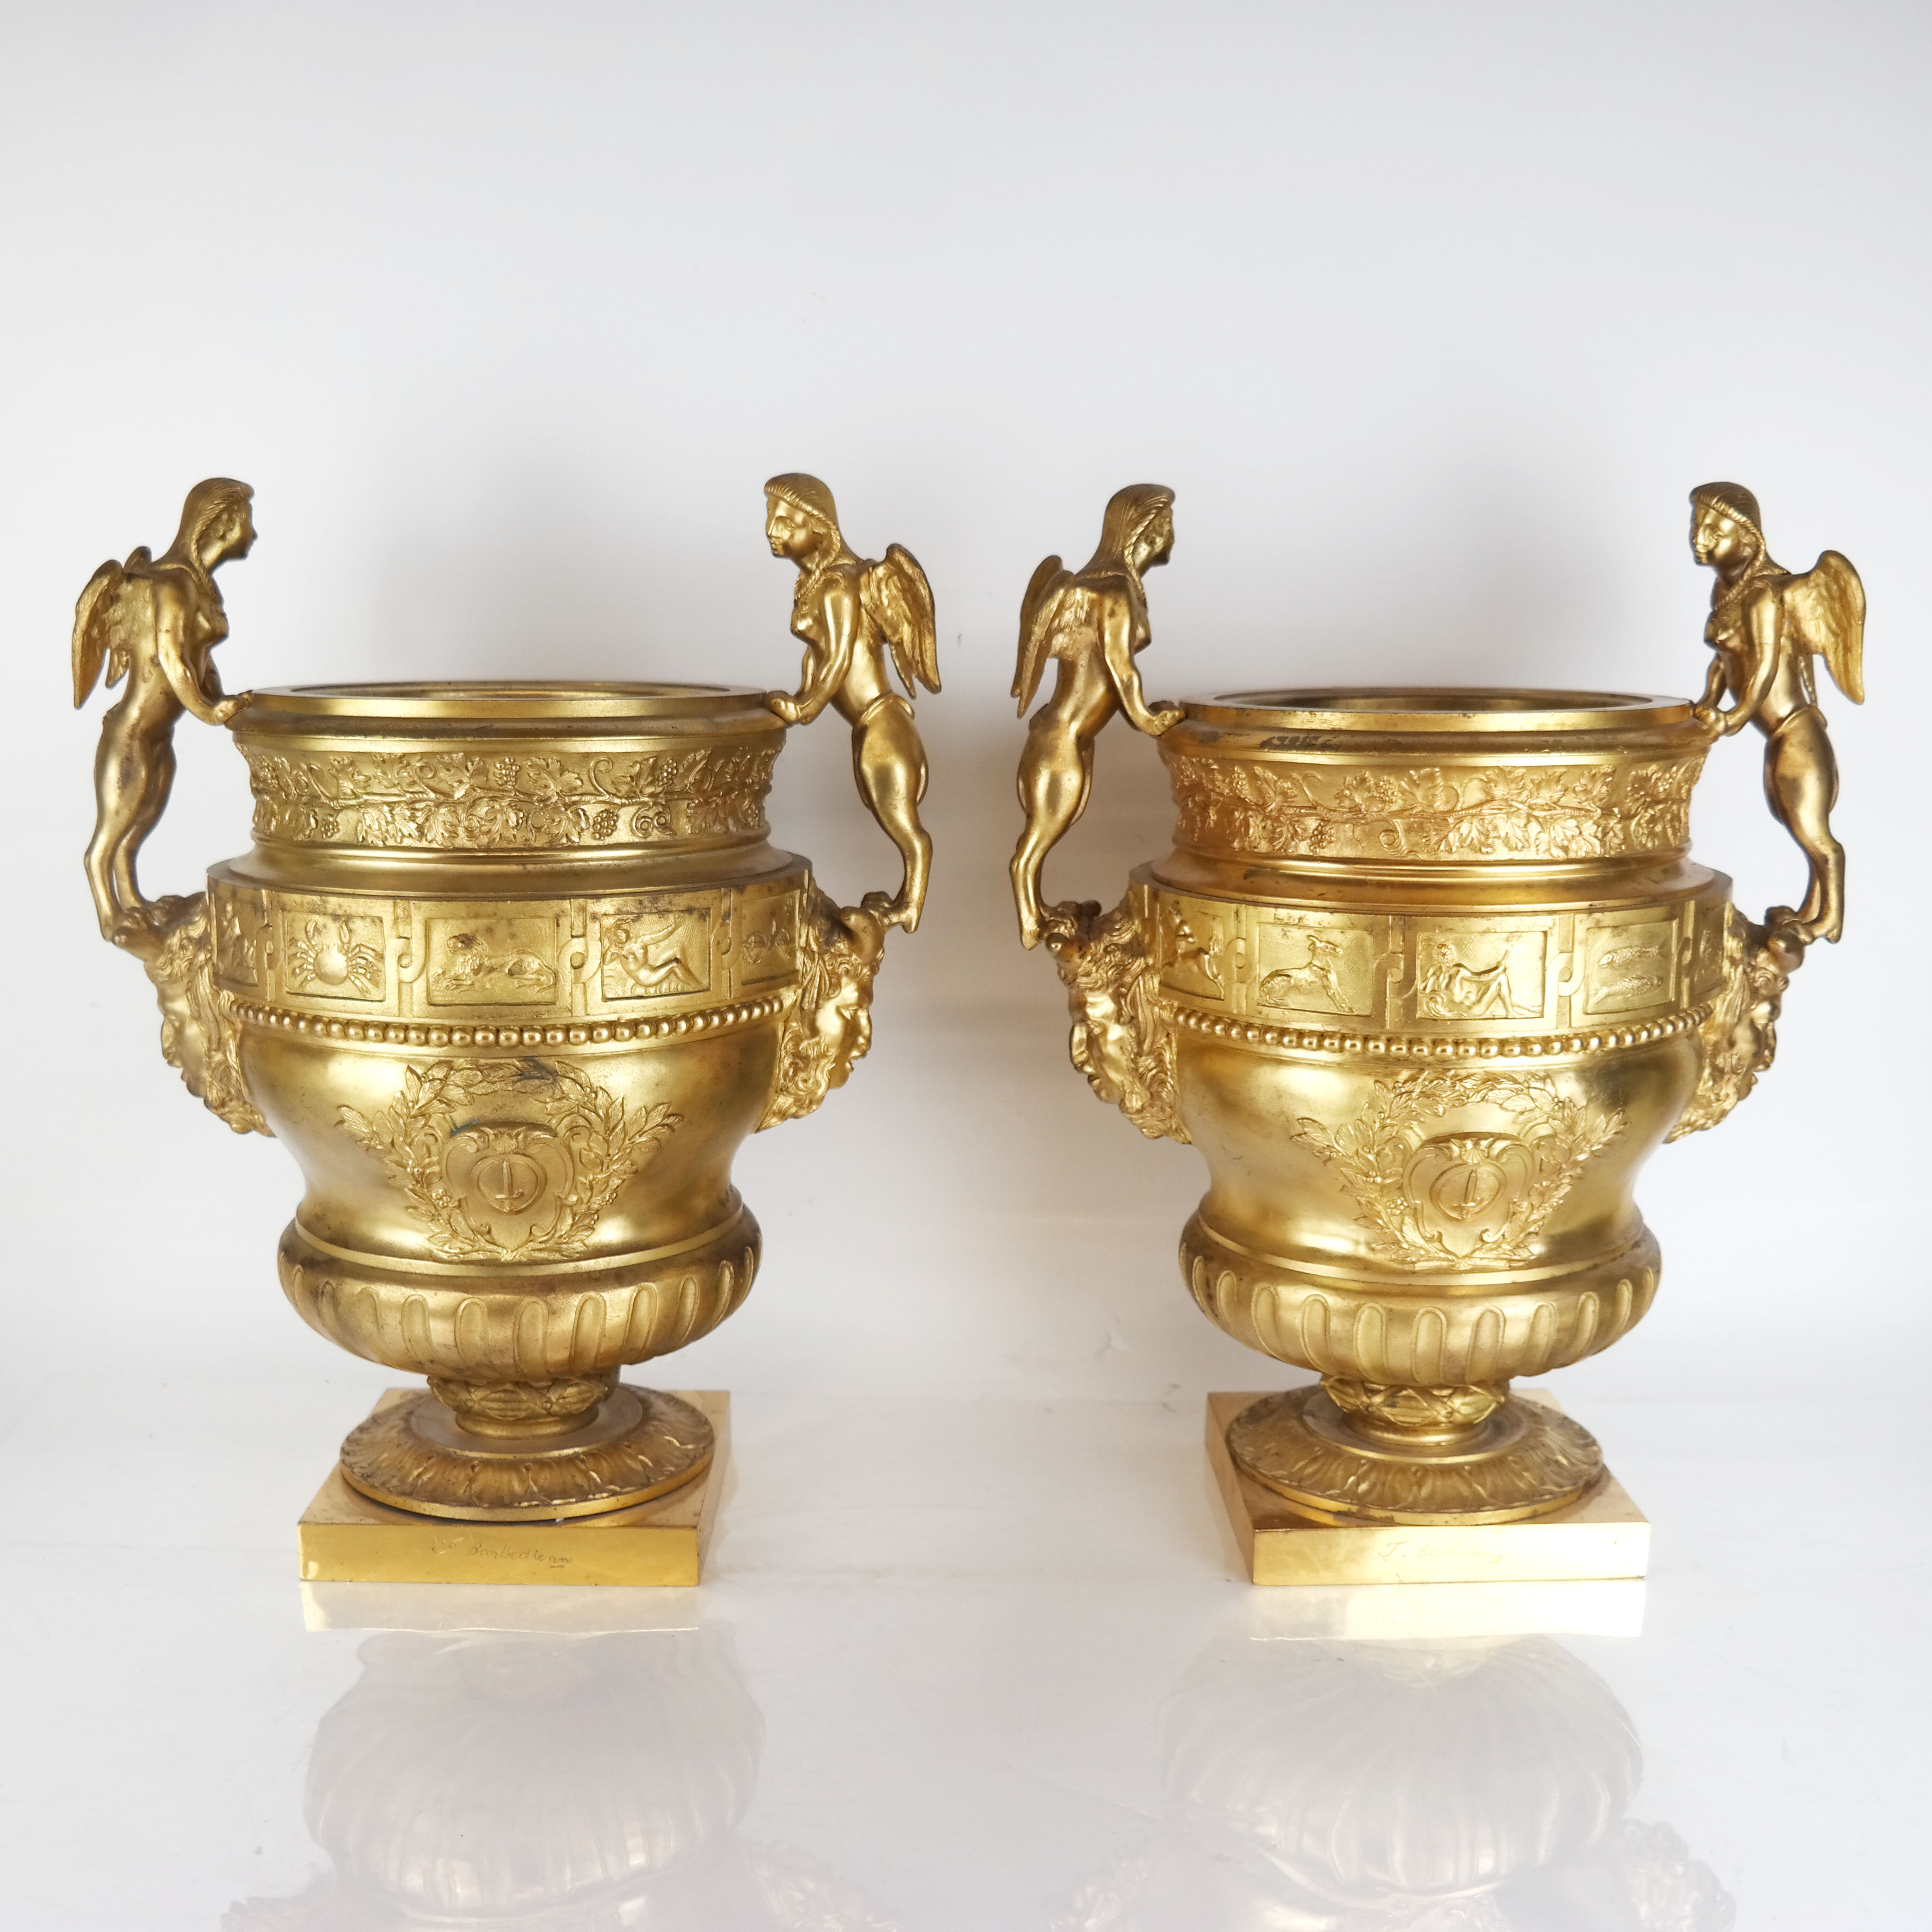 Pair of Neoclassical-style gilt bronze wine coolers, est. $3,000-$5,000